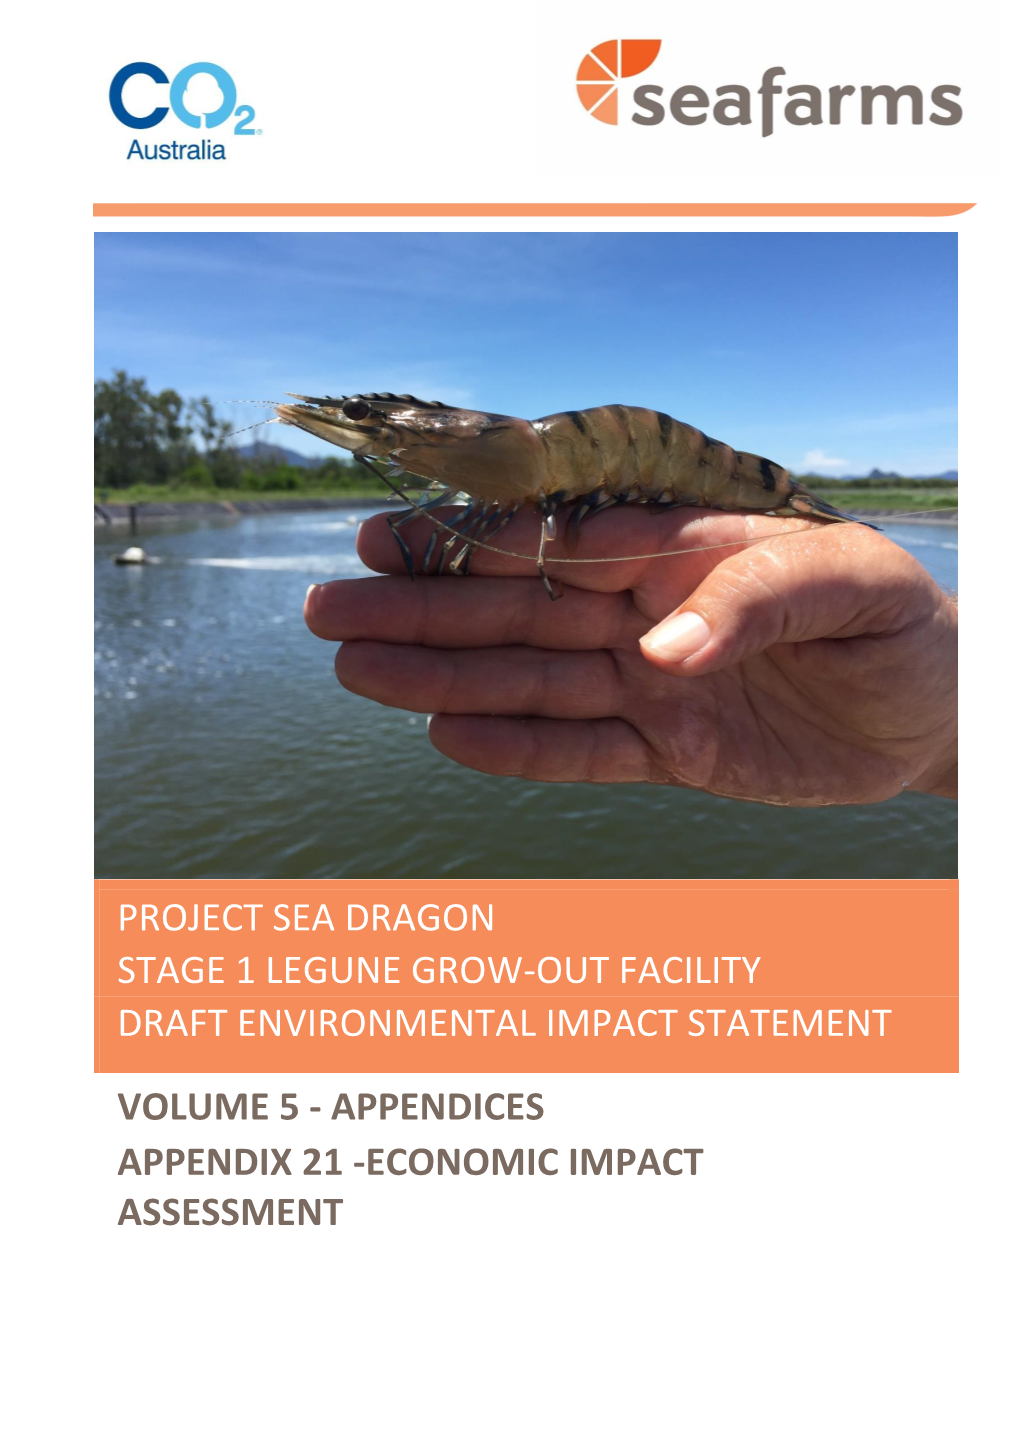 Project Sea Dragon Stage 1 Legune Grow-Out Facility Draft Environmental Impact Statement